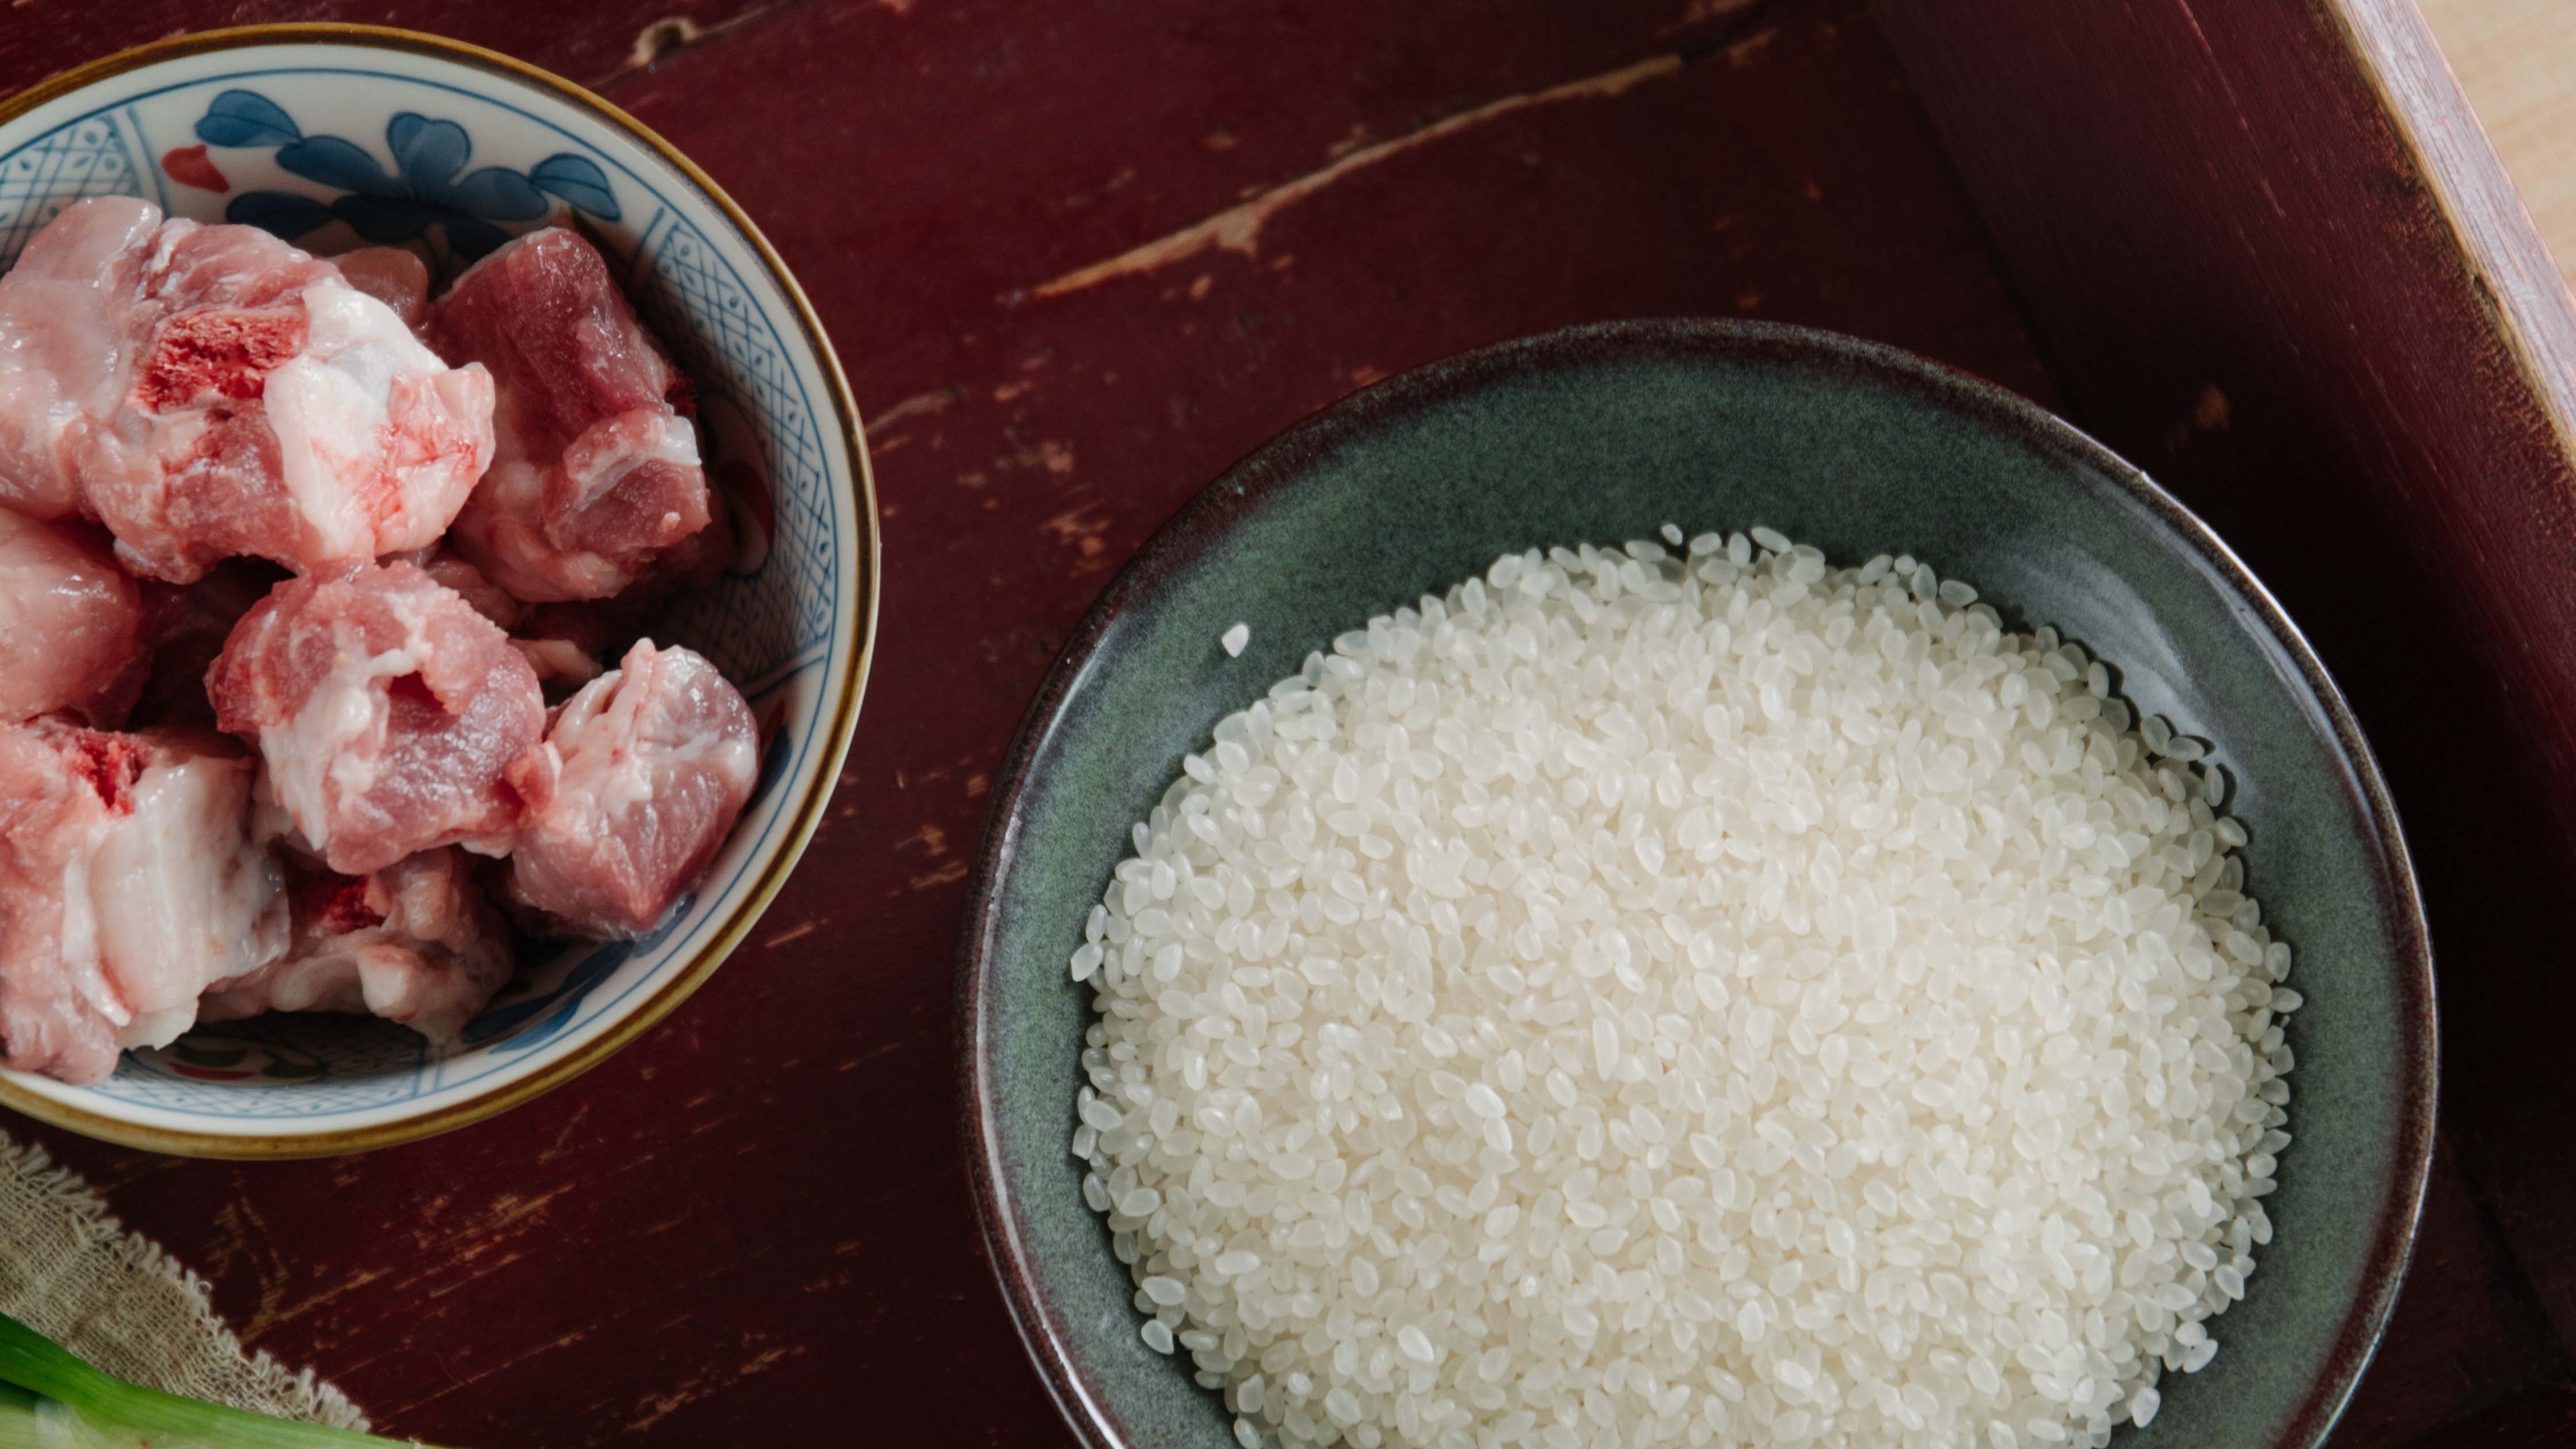 Download 3840x2160 Rice, Meat, Cooking, Uncooked